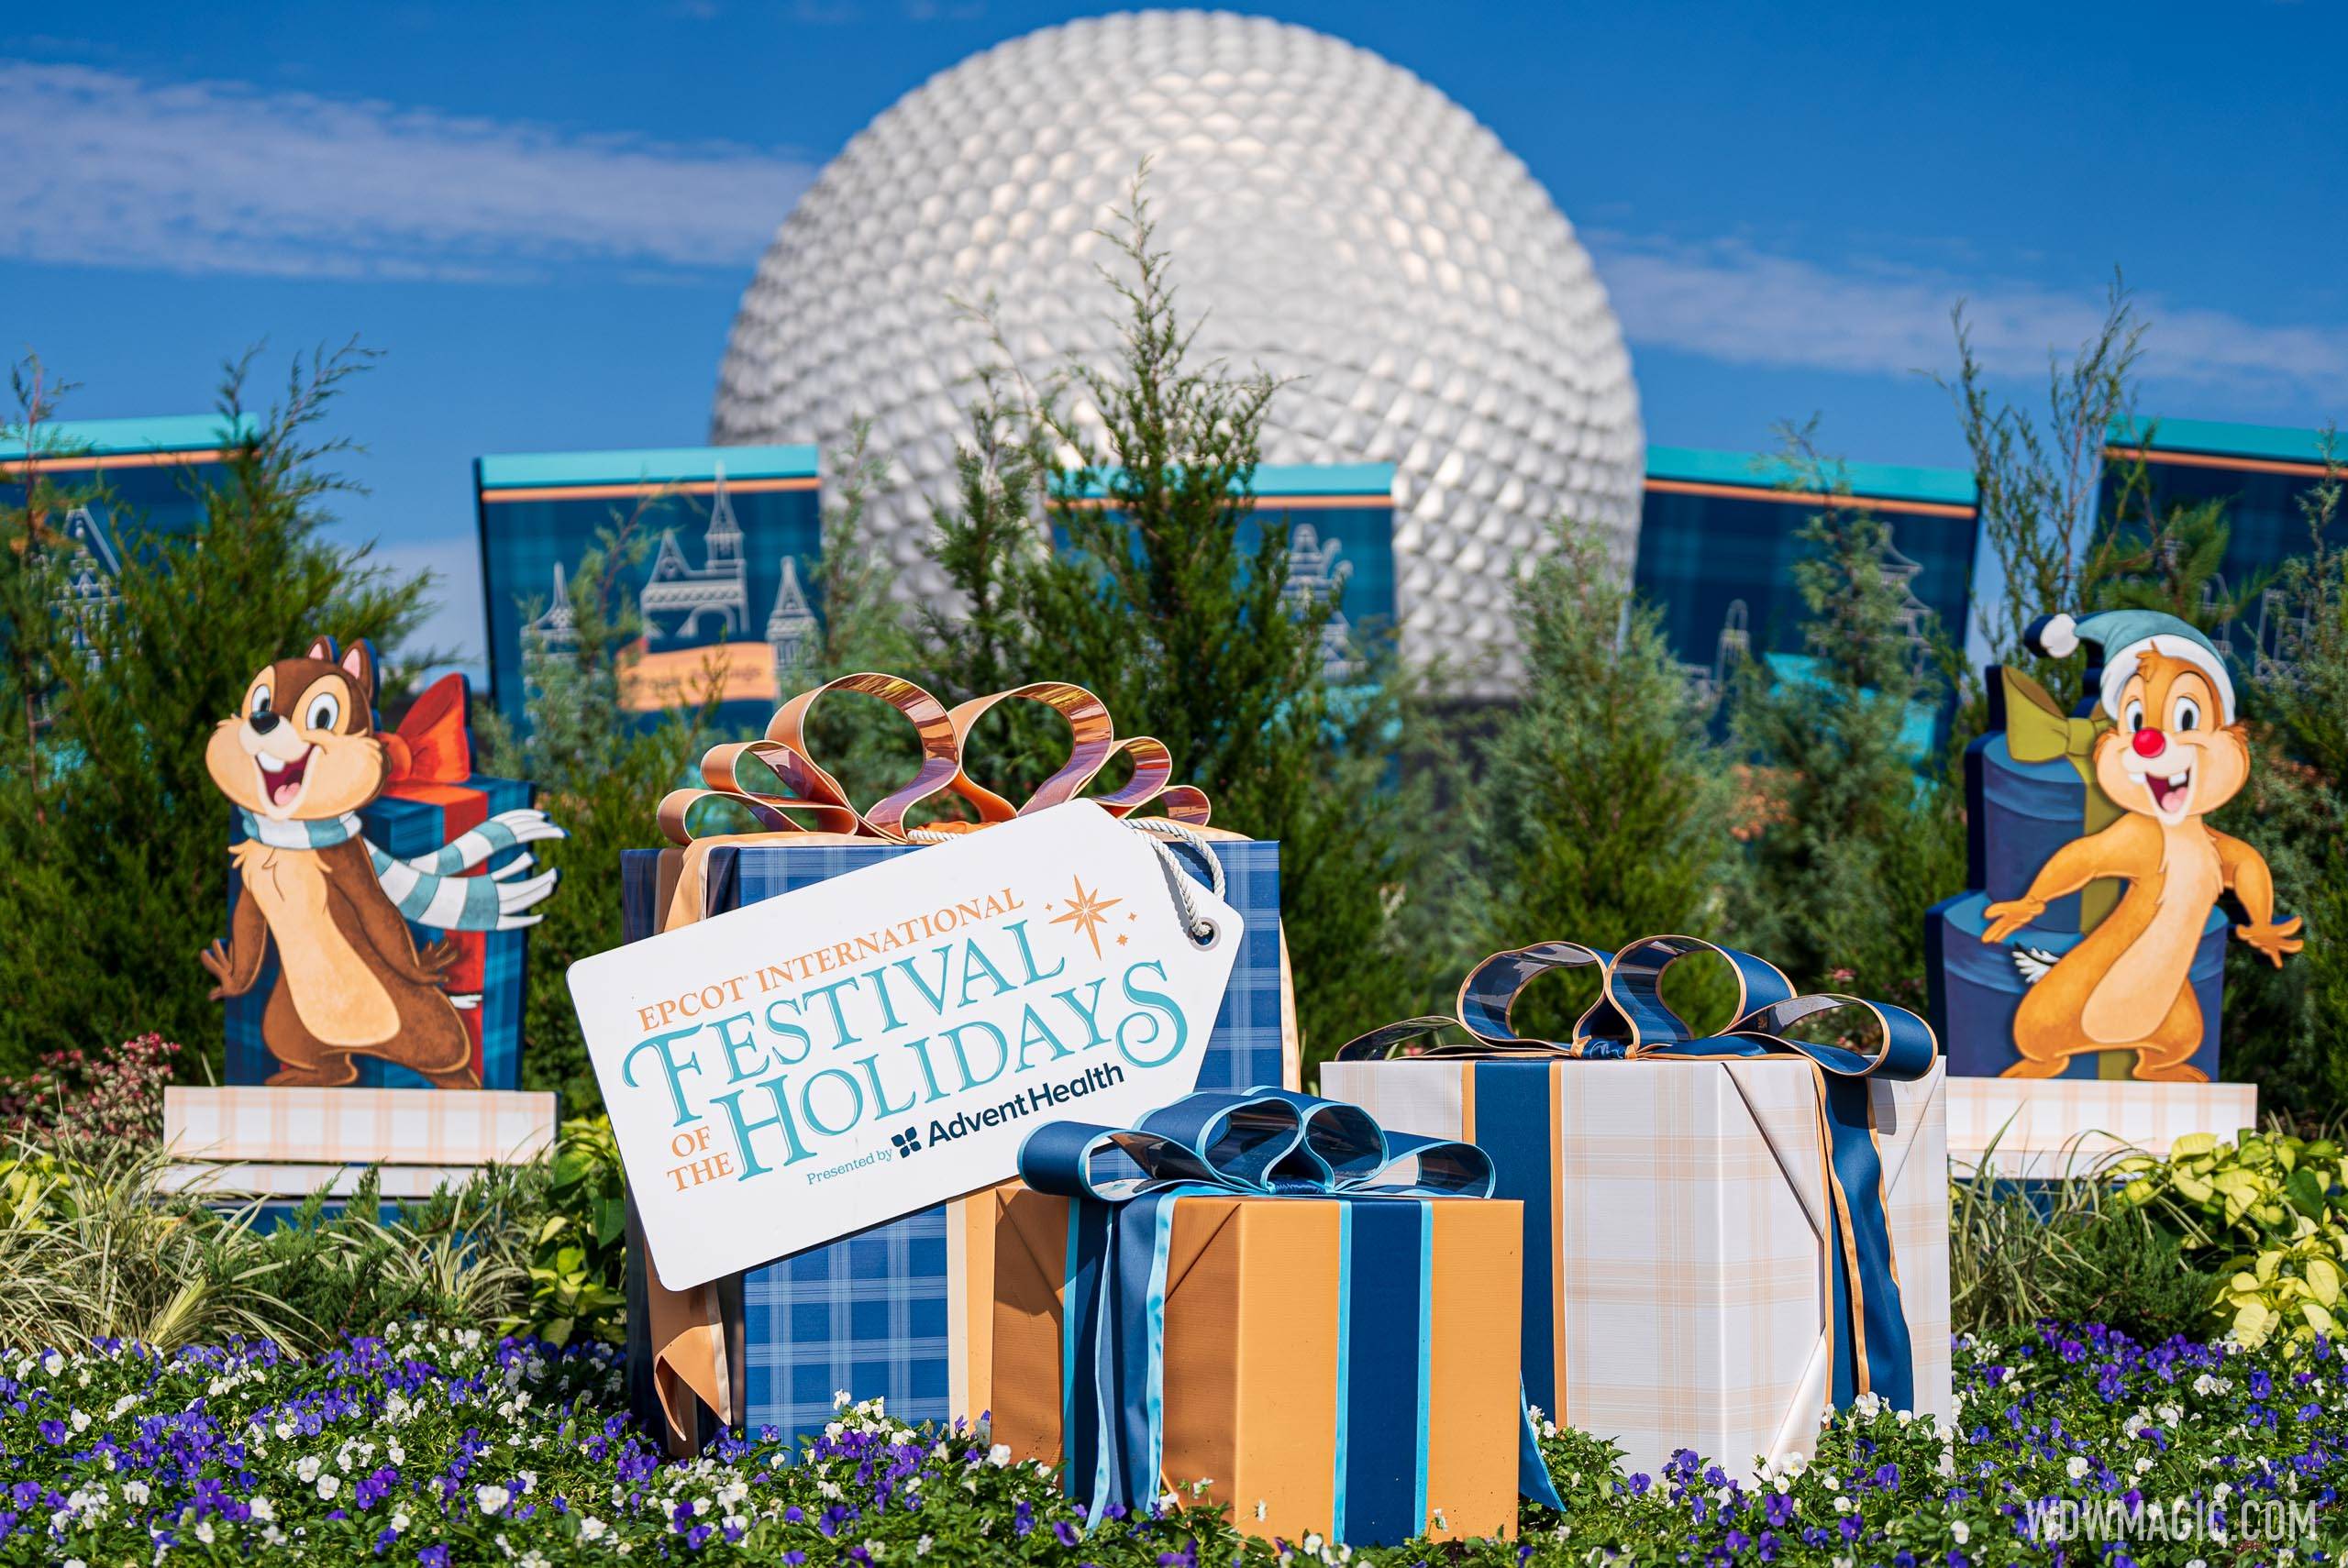 2023 EPCOT International Festival of the Holidays takes place November 24 through December 30